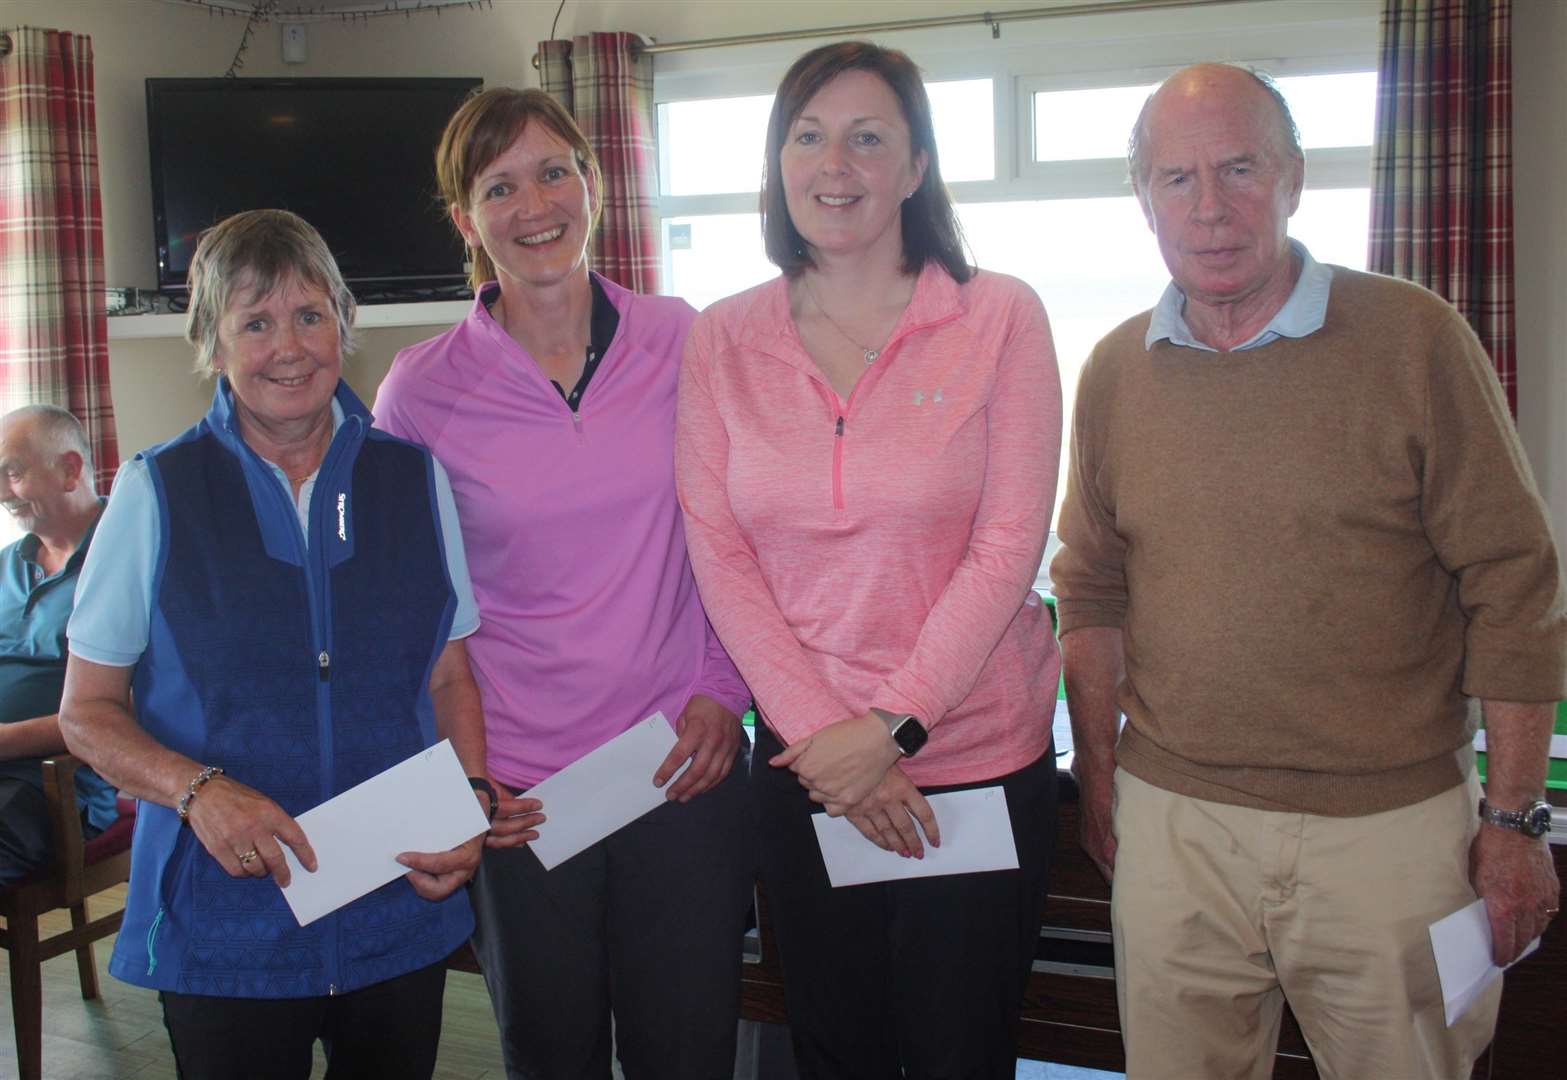 three members of the team who won the Bighouse Open Scramble on Sunday, from left to right Joy Fraser, Heather Campbell and Nicola Campbell with Toby Ward of the Bighouse Estate.